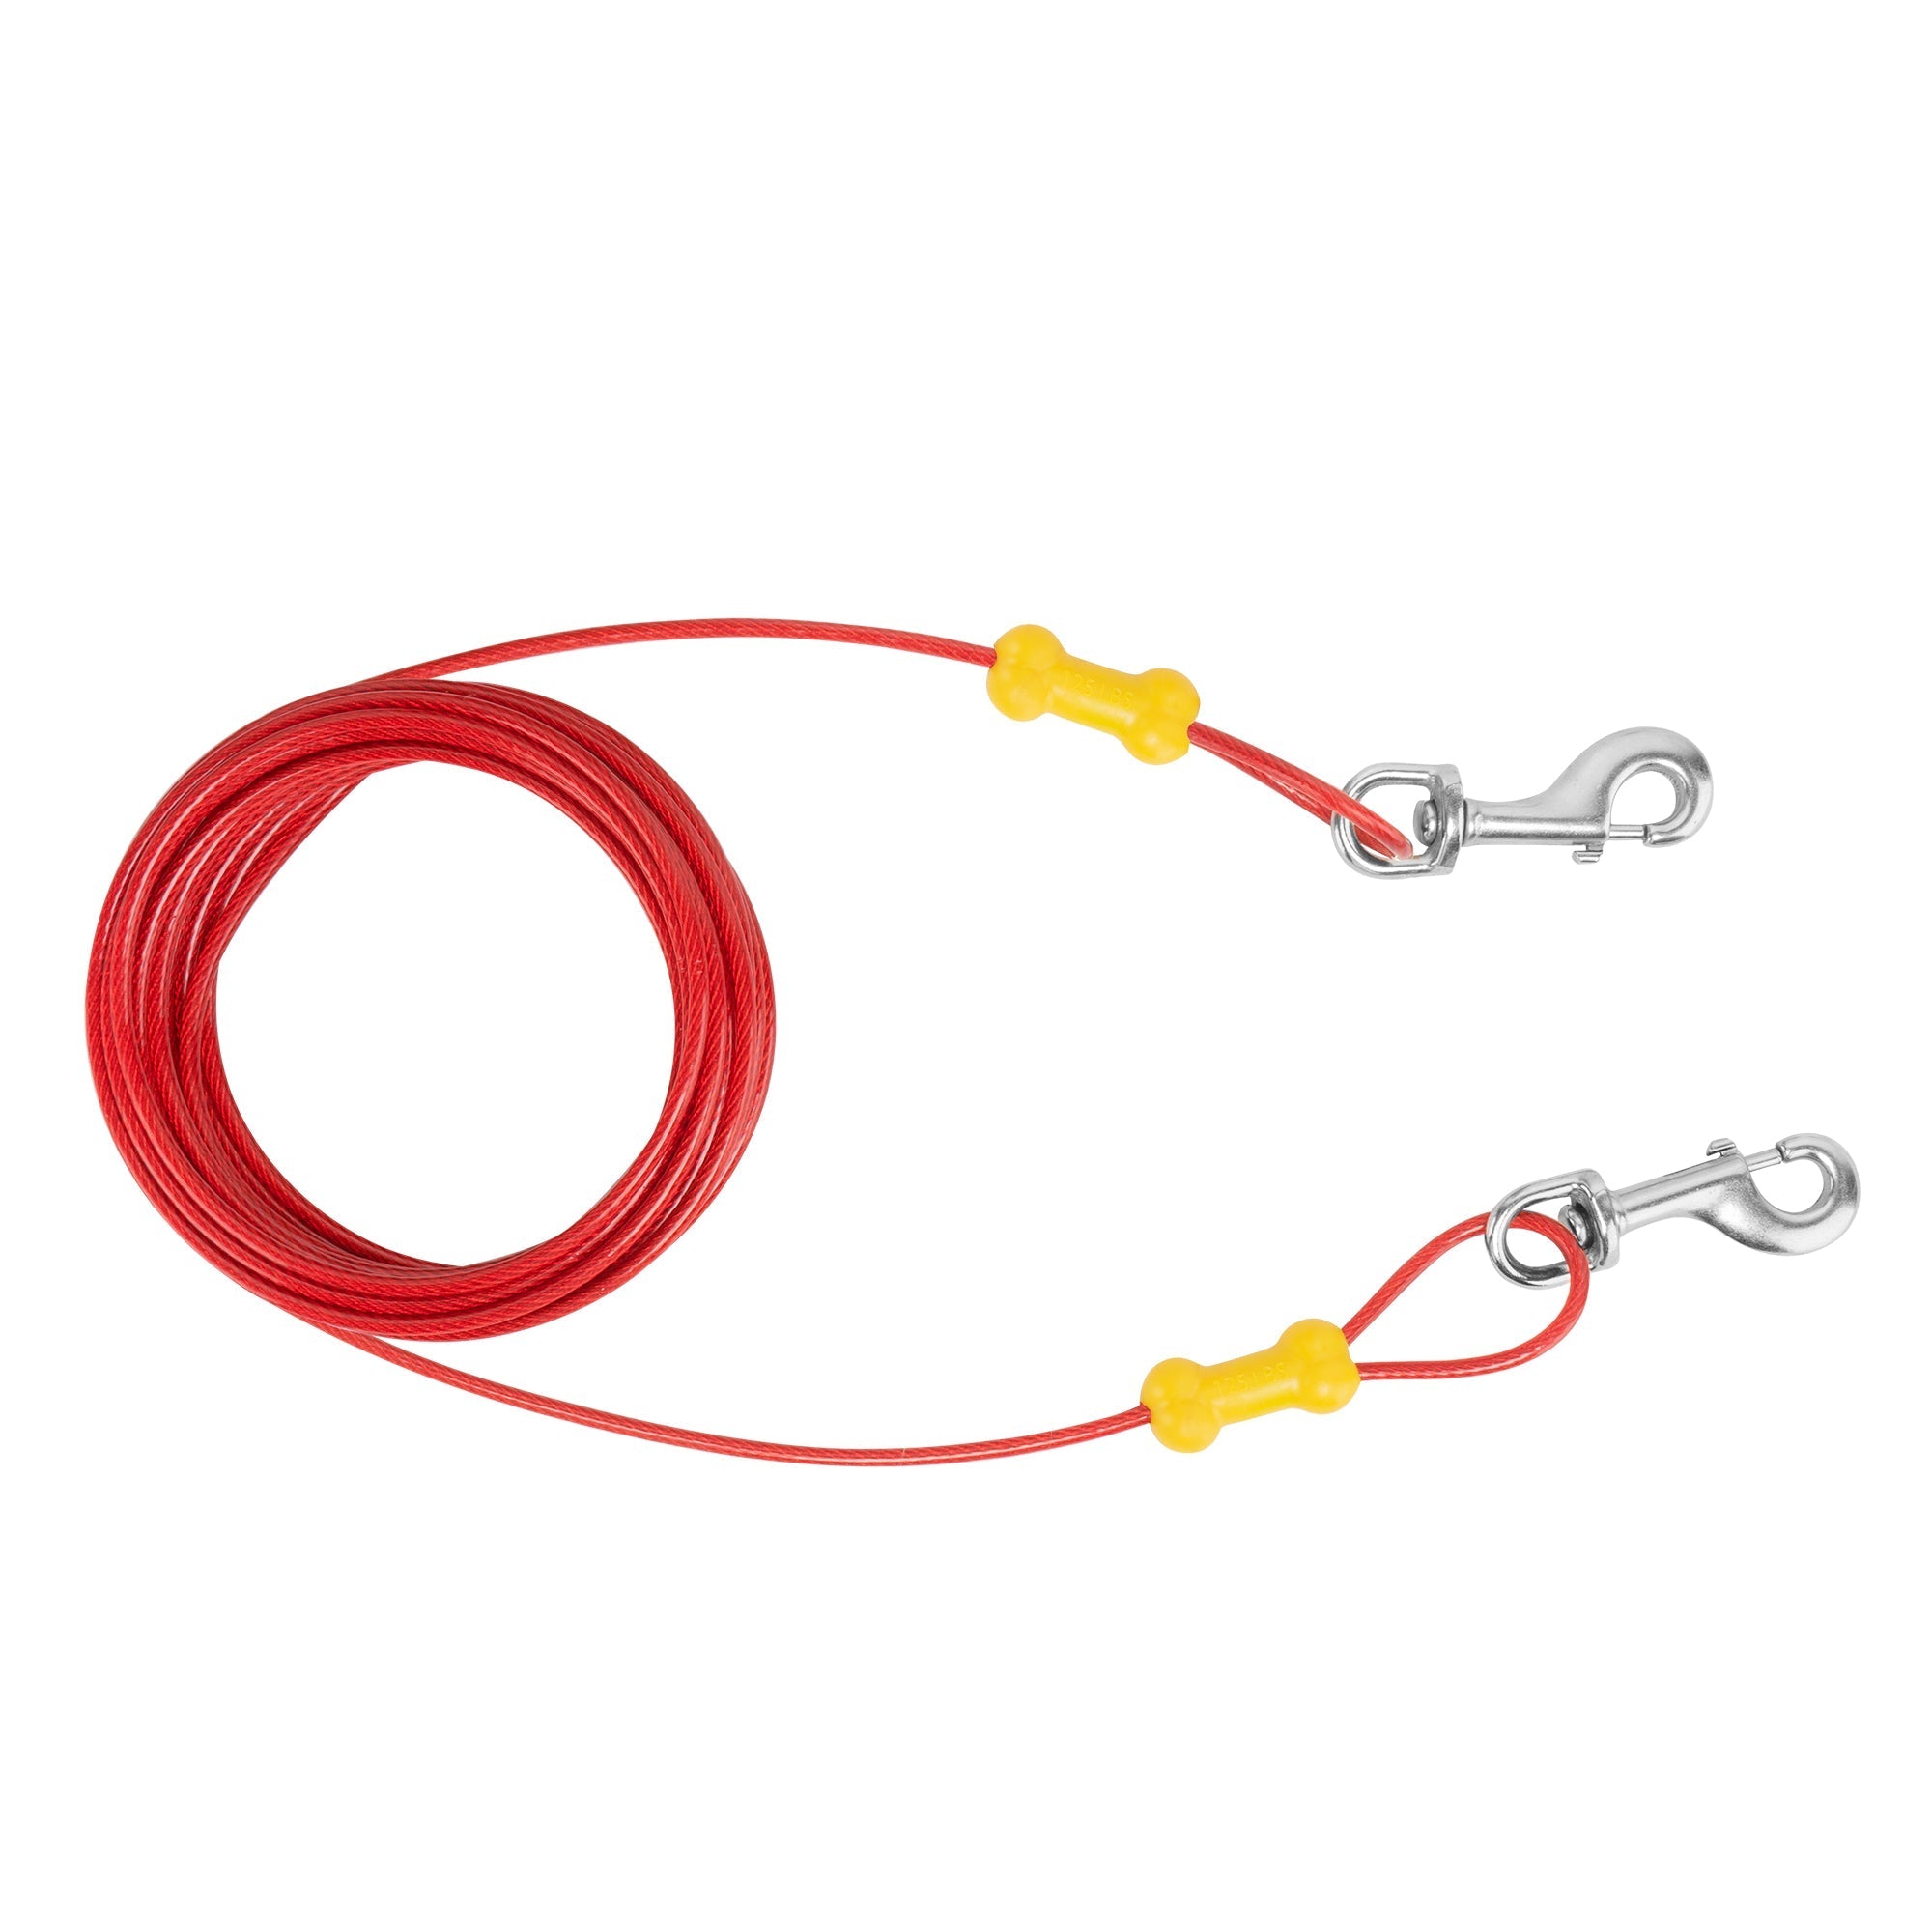 Reflective Vinyl-Covered Tie-Out Cable - Heavy Duty